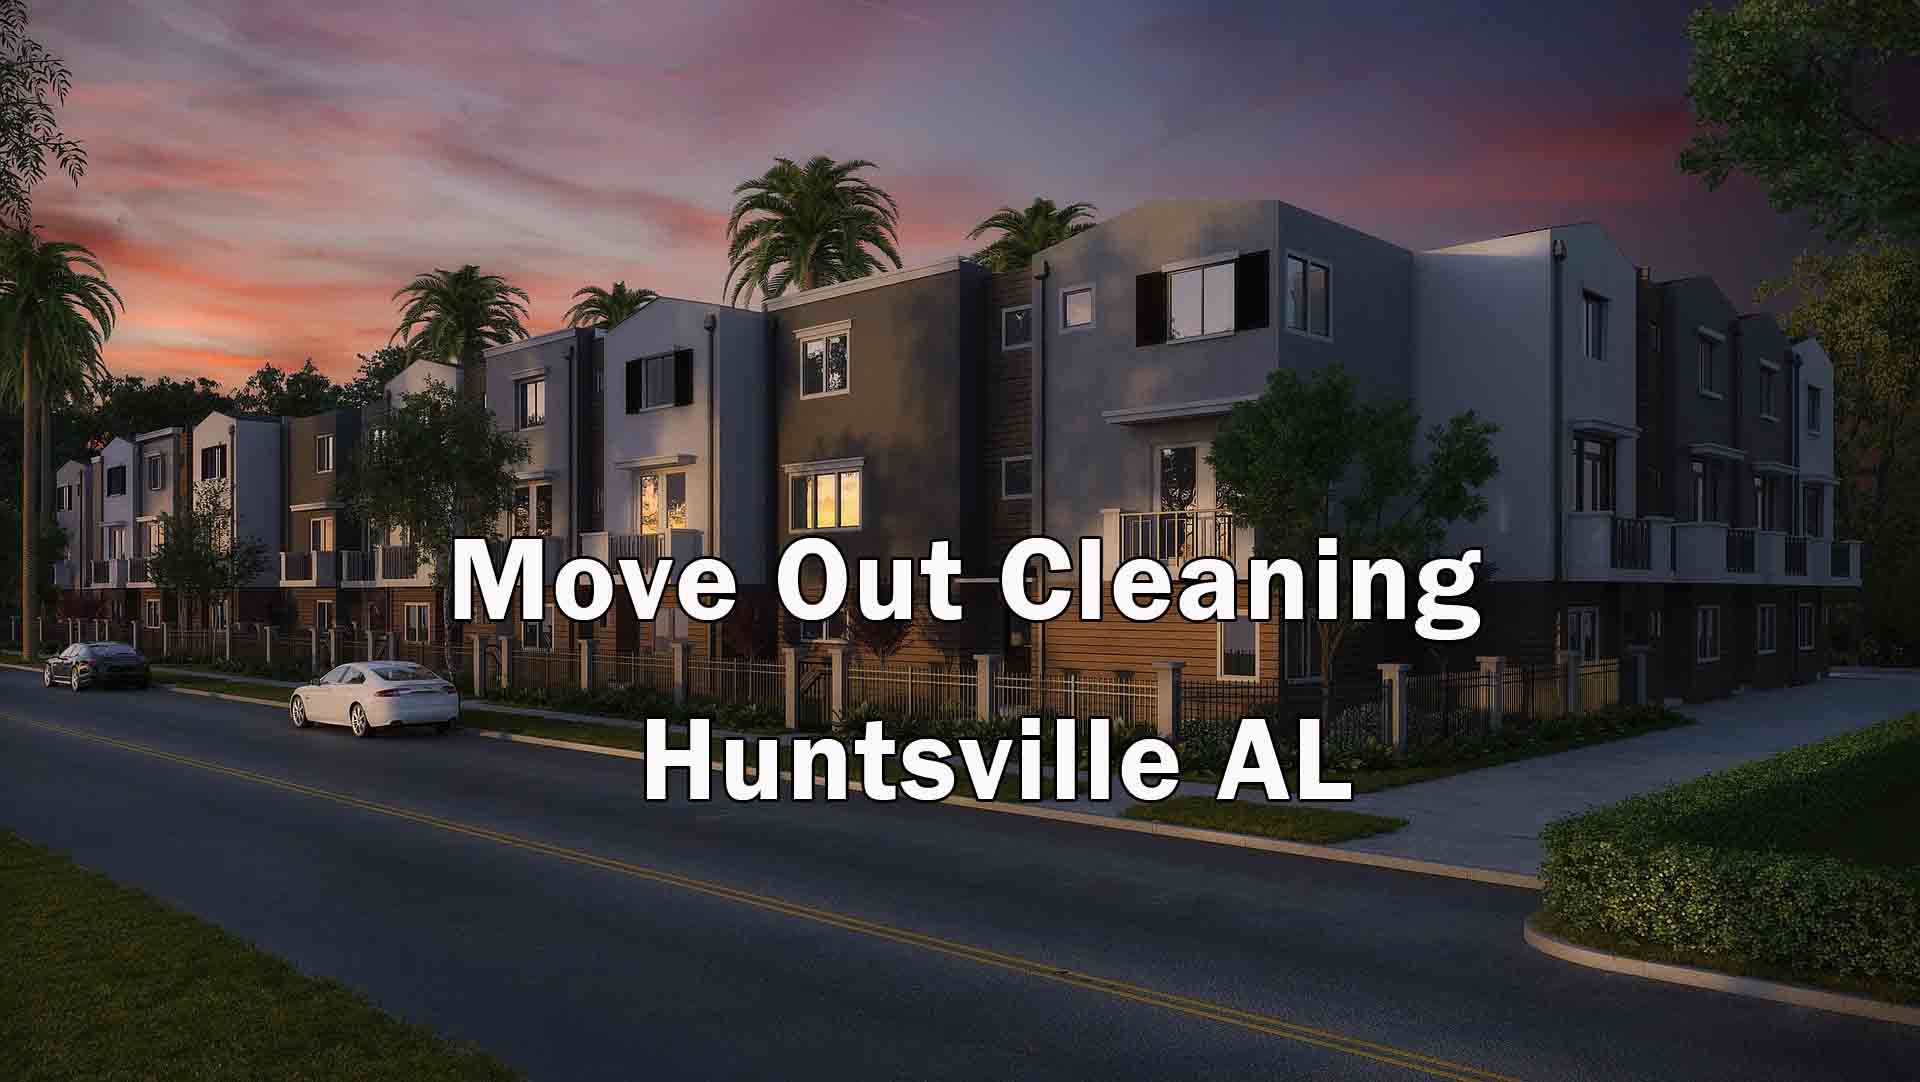 Move Out Cleaning - Huntsville AL